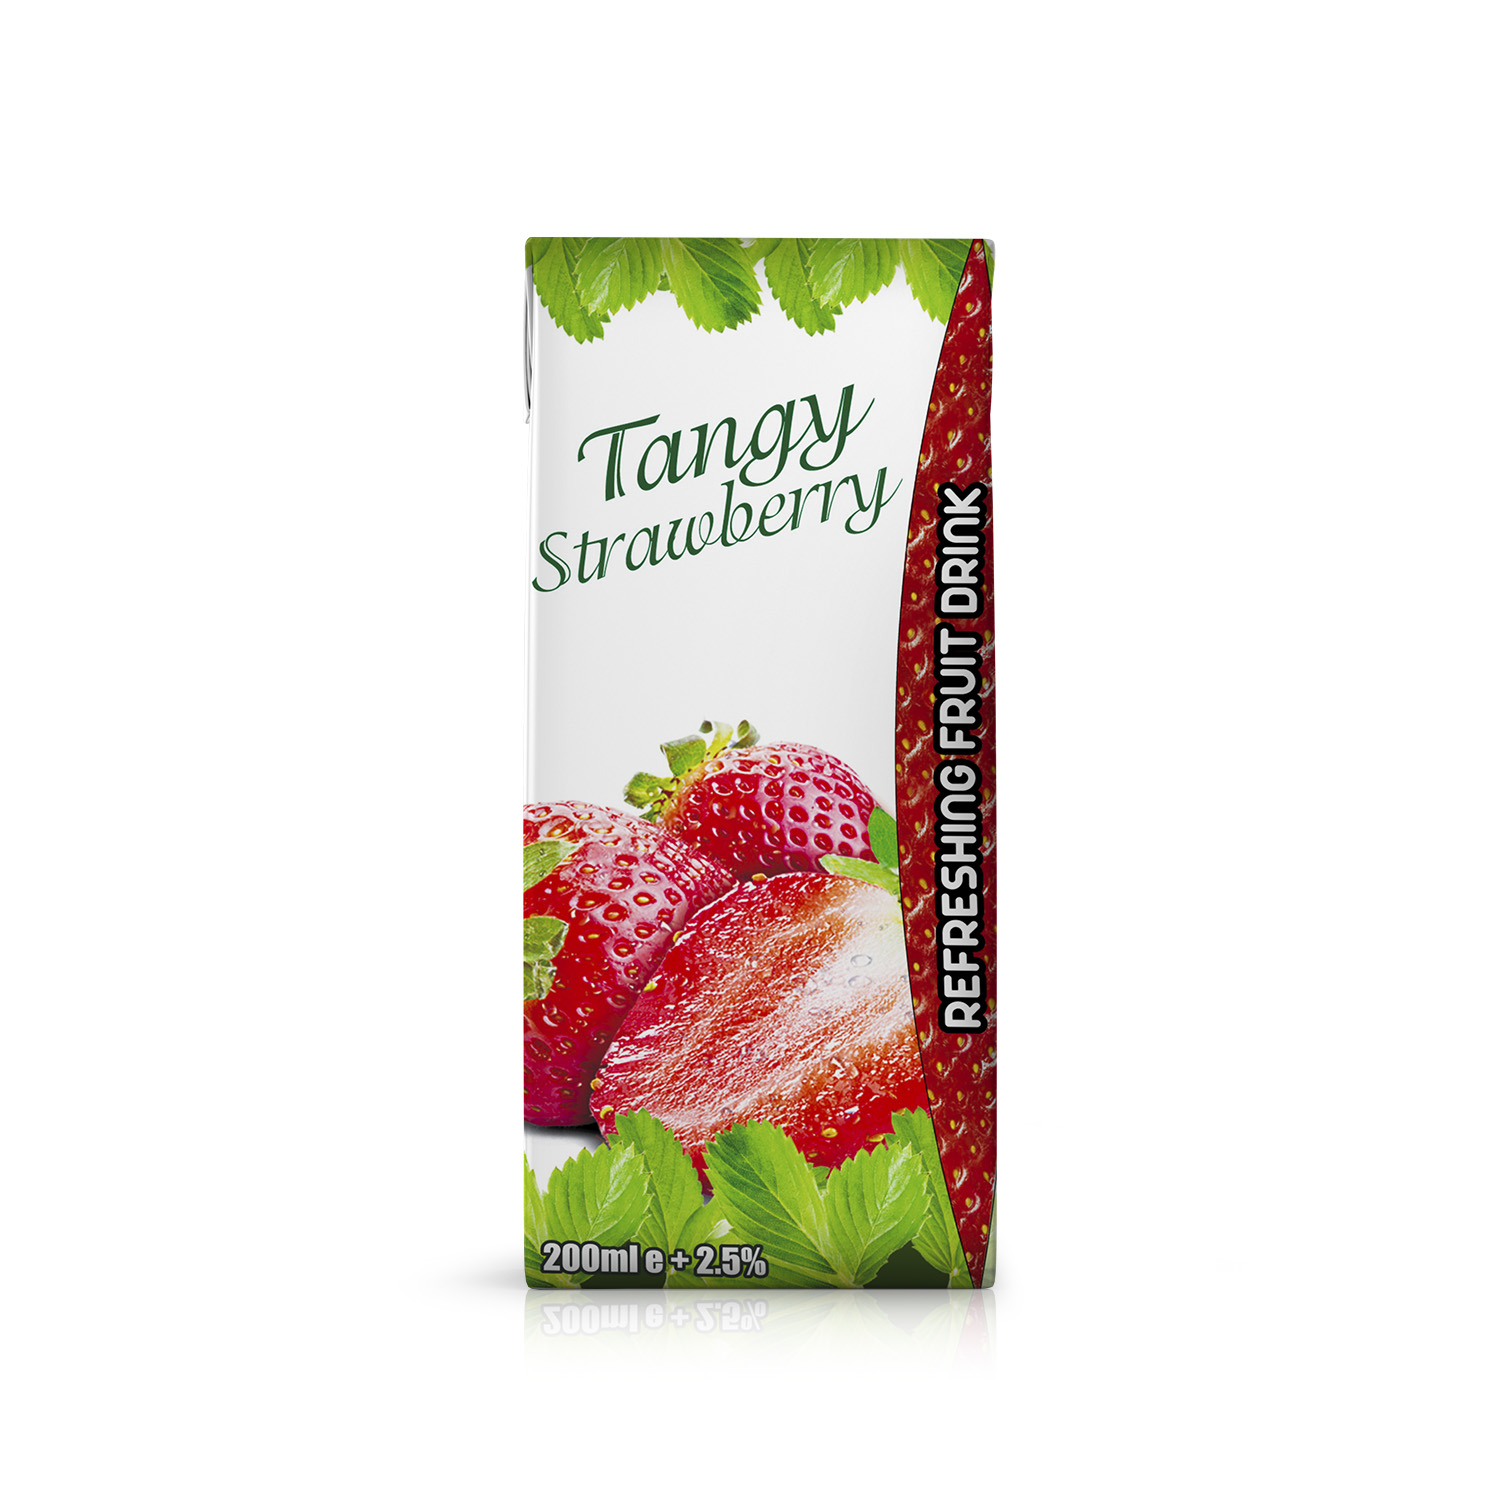 TANGY STRAWBERRY